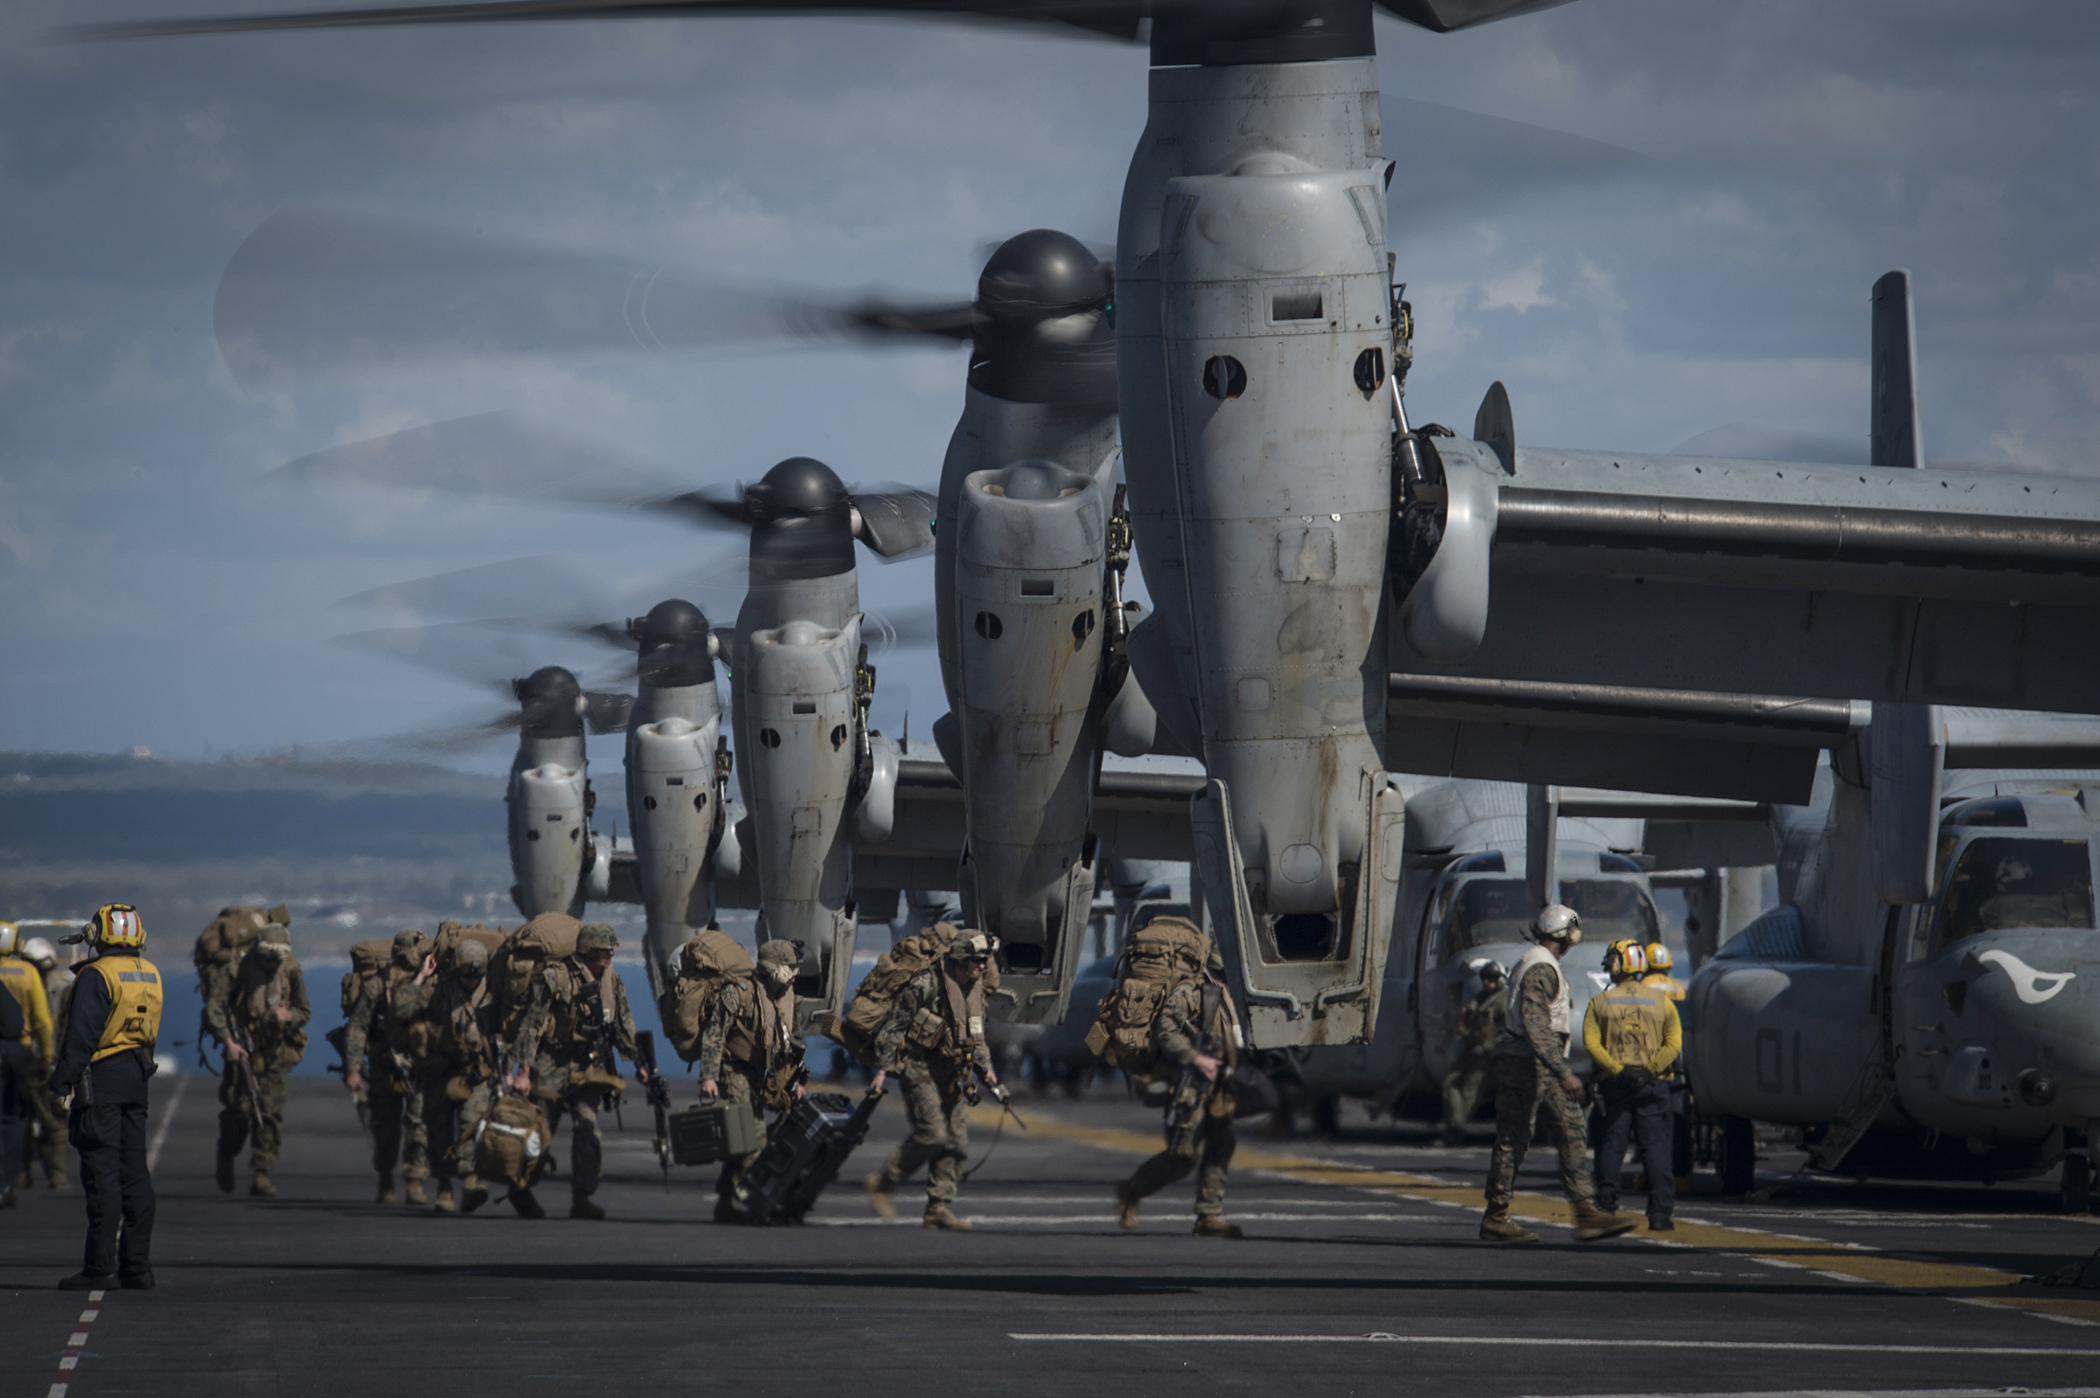 Marines from the 11th Marine Expeditionary Unit (11th MEU) board MV-22 Ospreys attached to Marine Medium Tiltrotor Squadron 163 (Reinforced) as they prepare to launch from the flight deck of the amphibious assault ship USS Makin Island (LHD-8) on Feb. 23, 2015. US Navy Photo